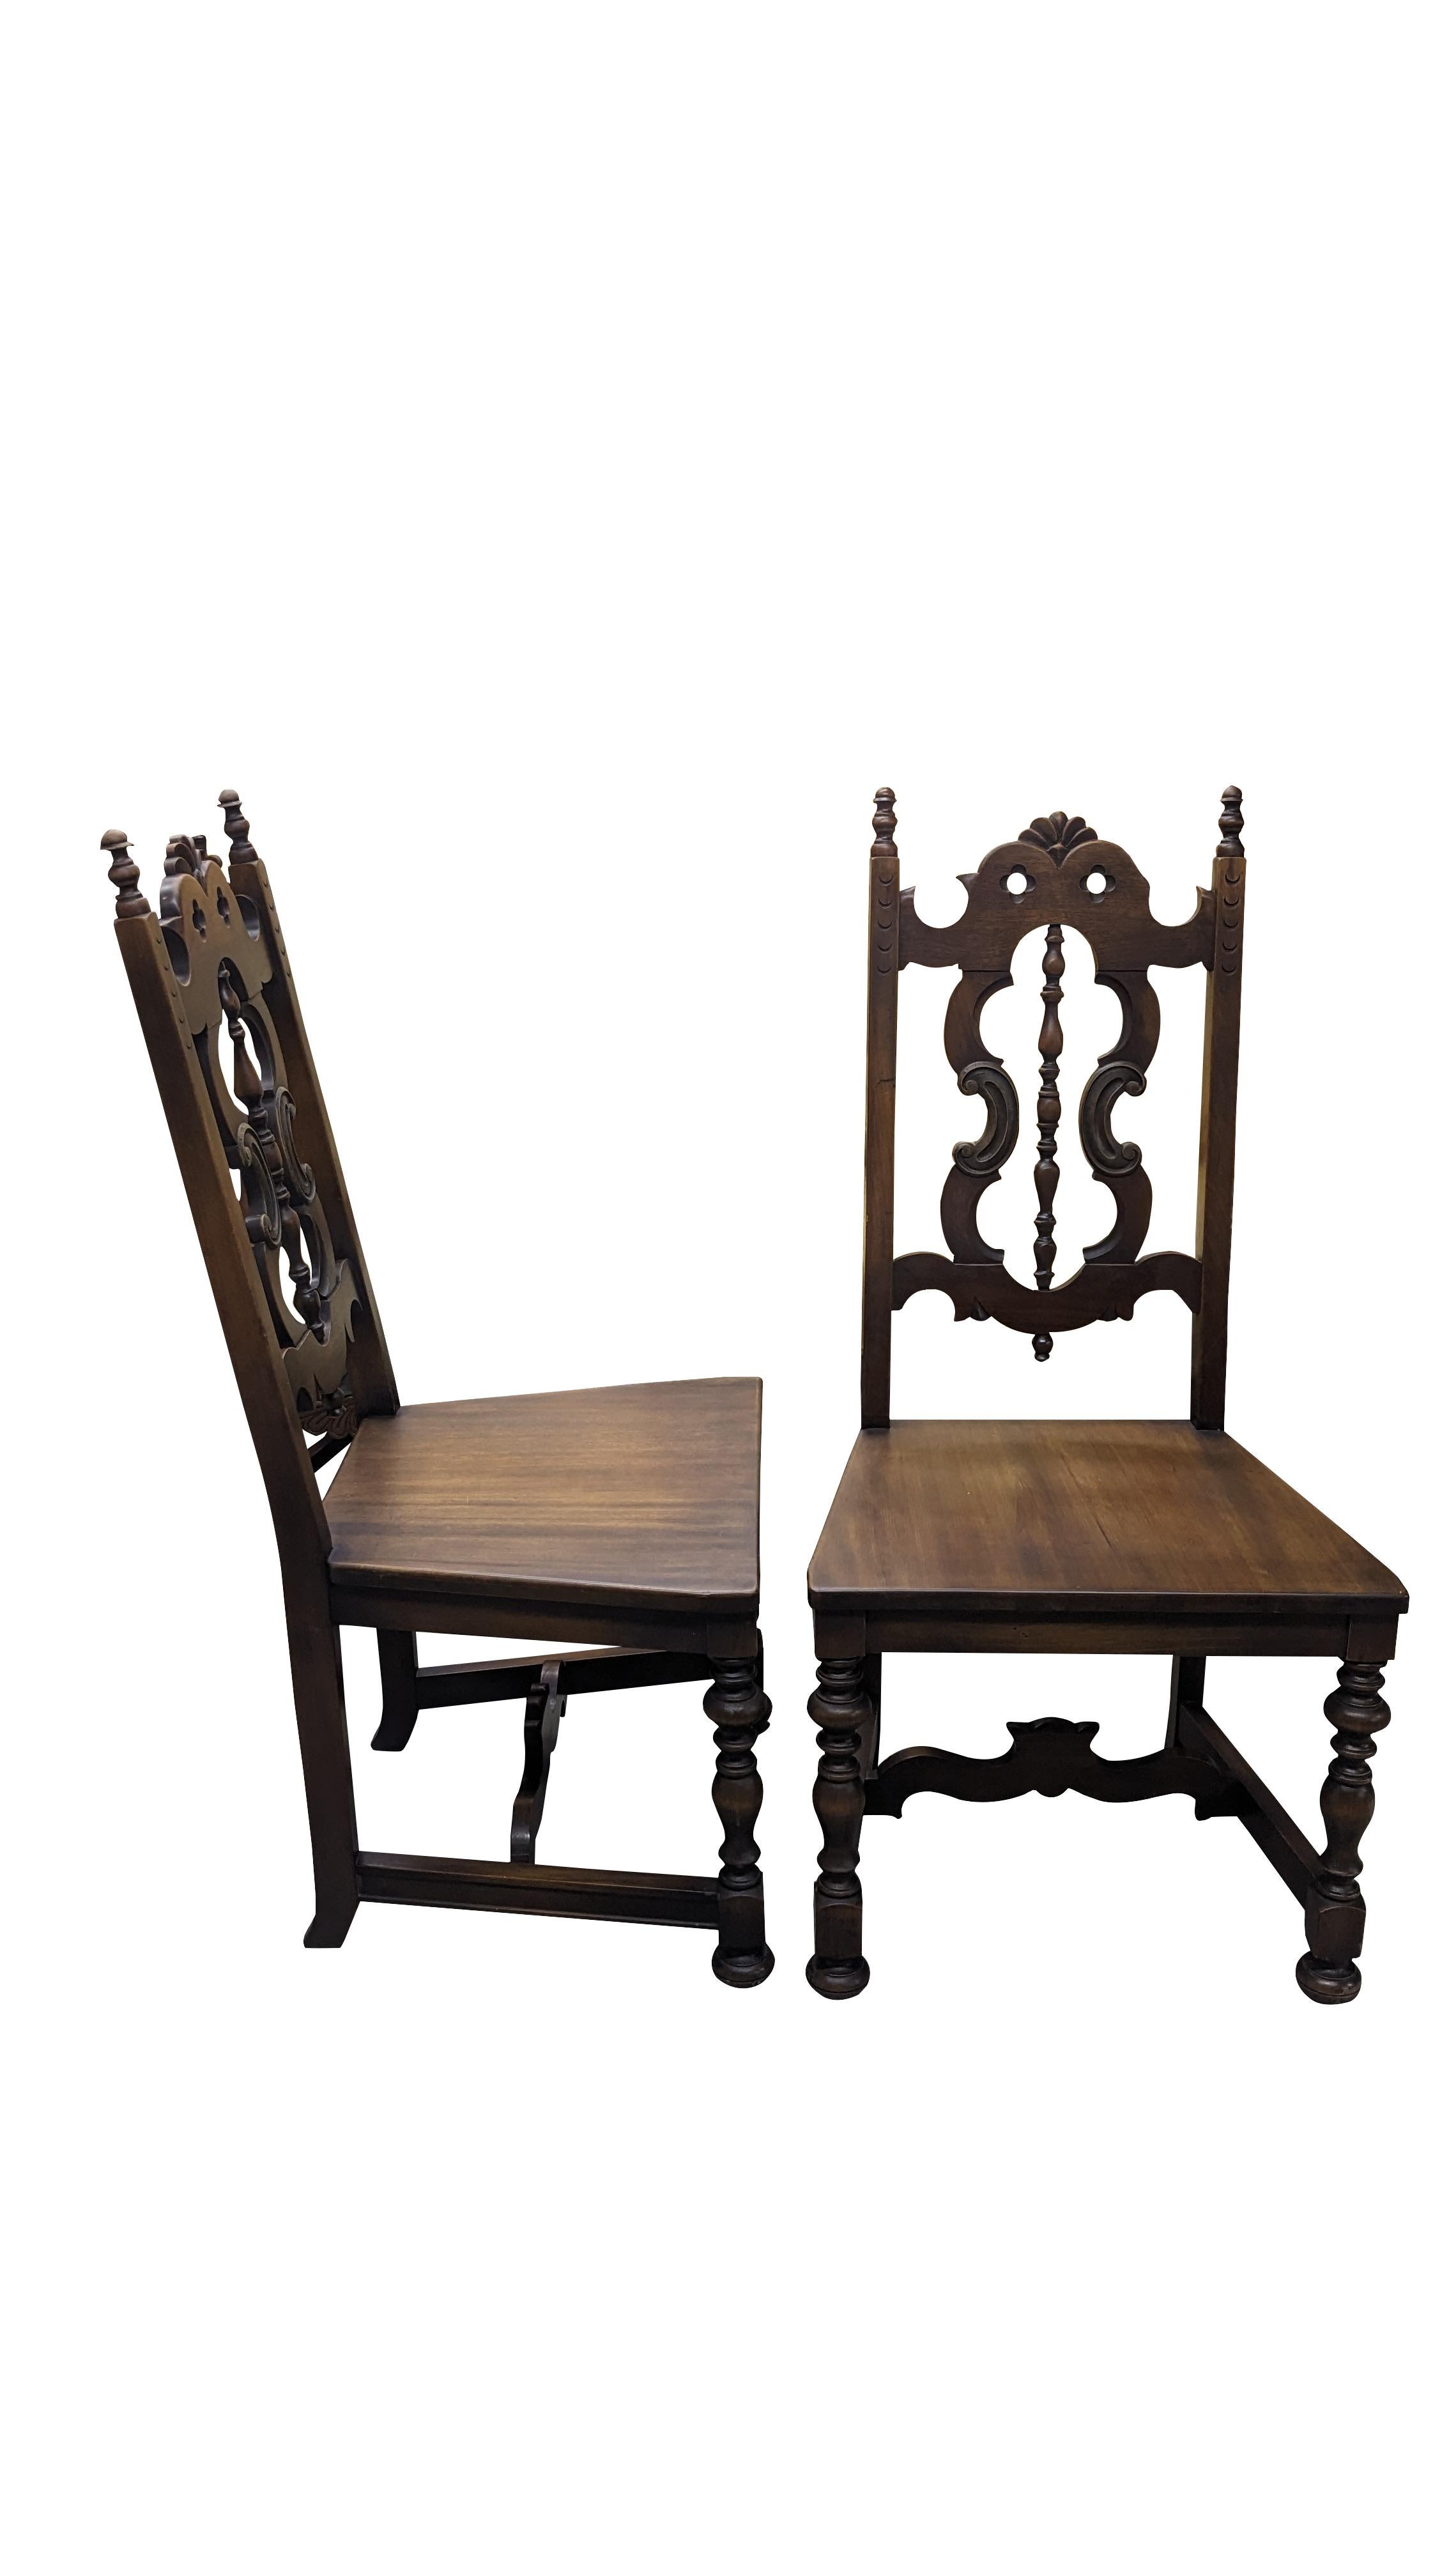 Set of 4 antique Life Time Furniture Jacobean / Spanish Revival dining chairs.  Made of walnut featuring Jacobean styling with turned supports, pierced back, serpentine accents and finials.

In the late 19th century and early 20th century most